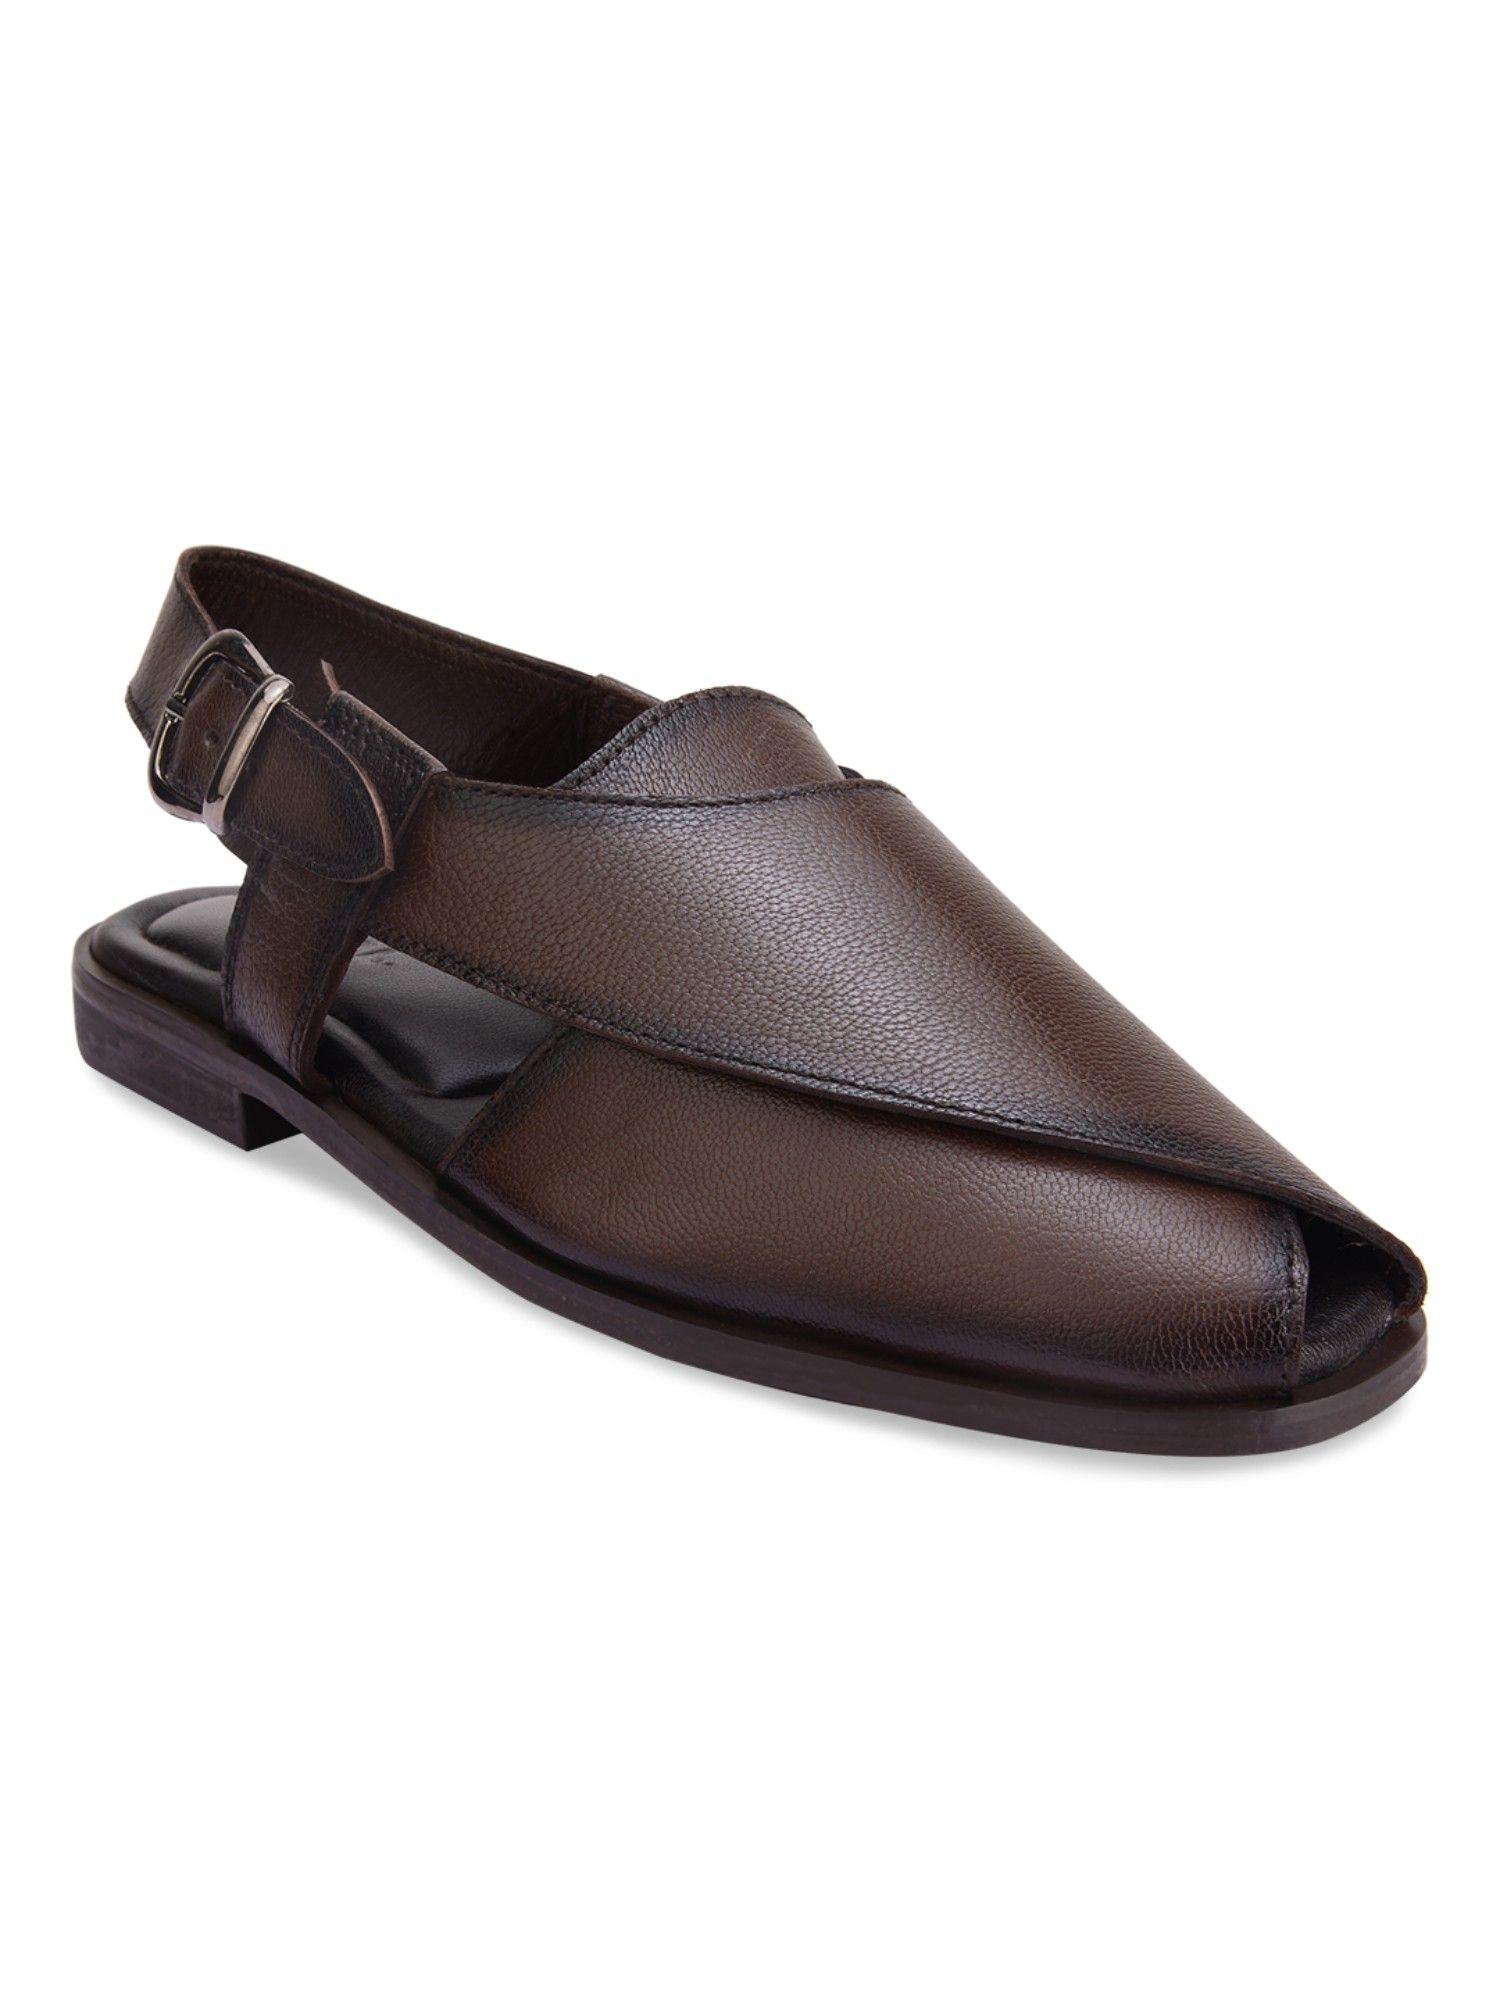 Brown Men Solid Leather Ethnic Sandals